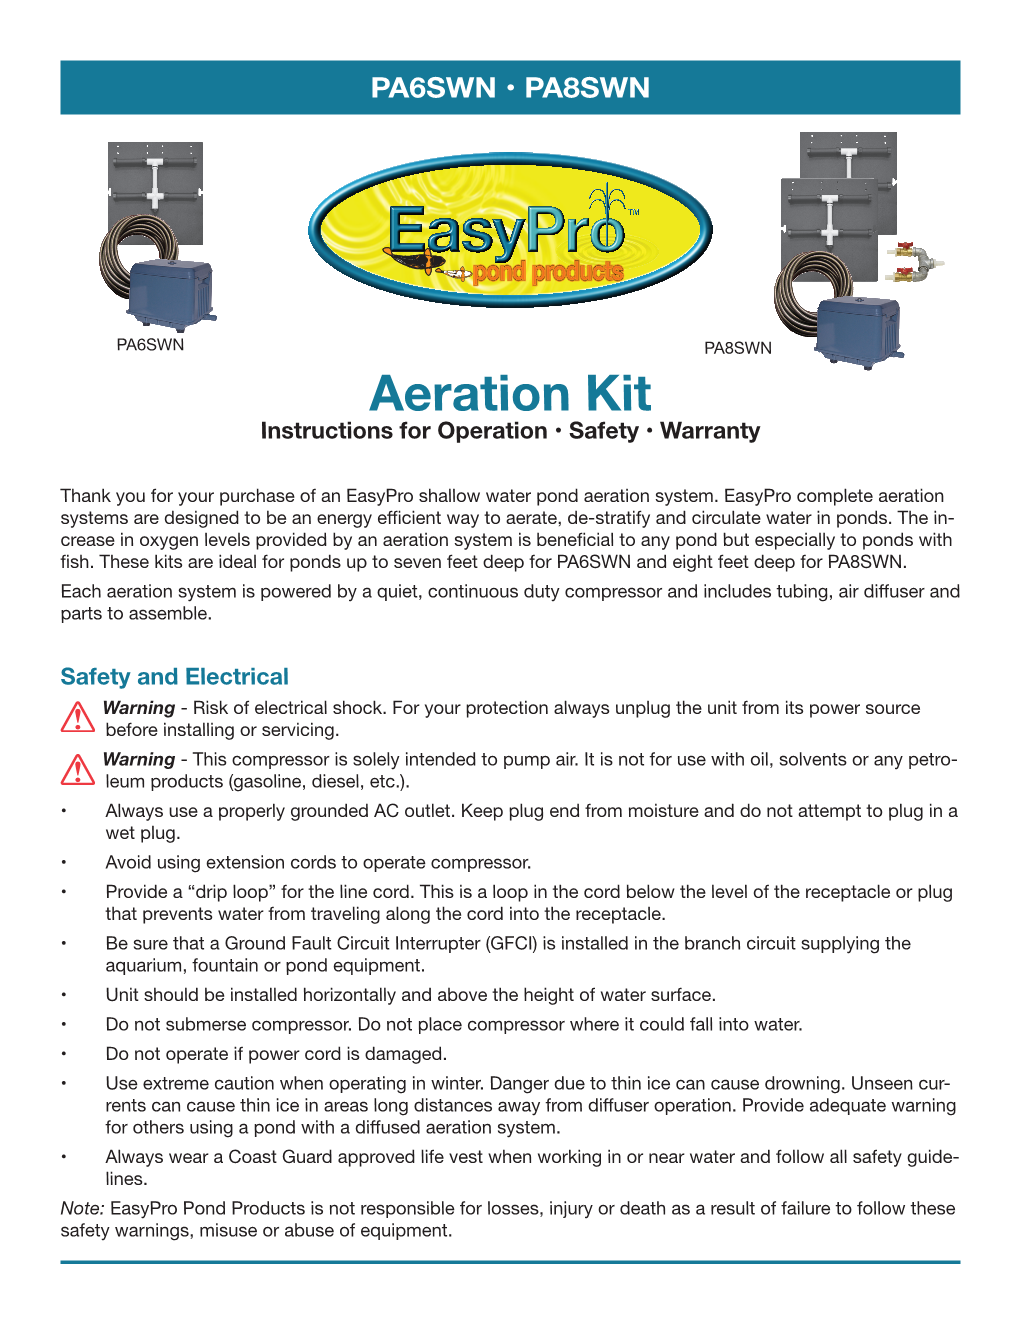 Aeration Kit Instructions for Operation • Safety • Warranty